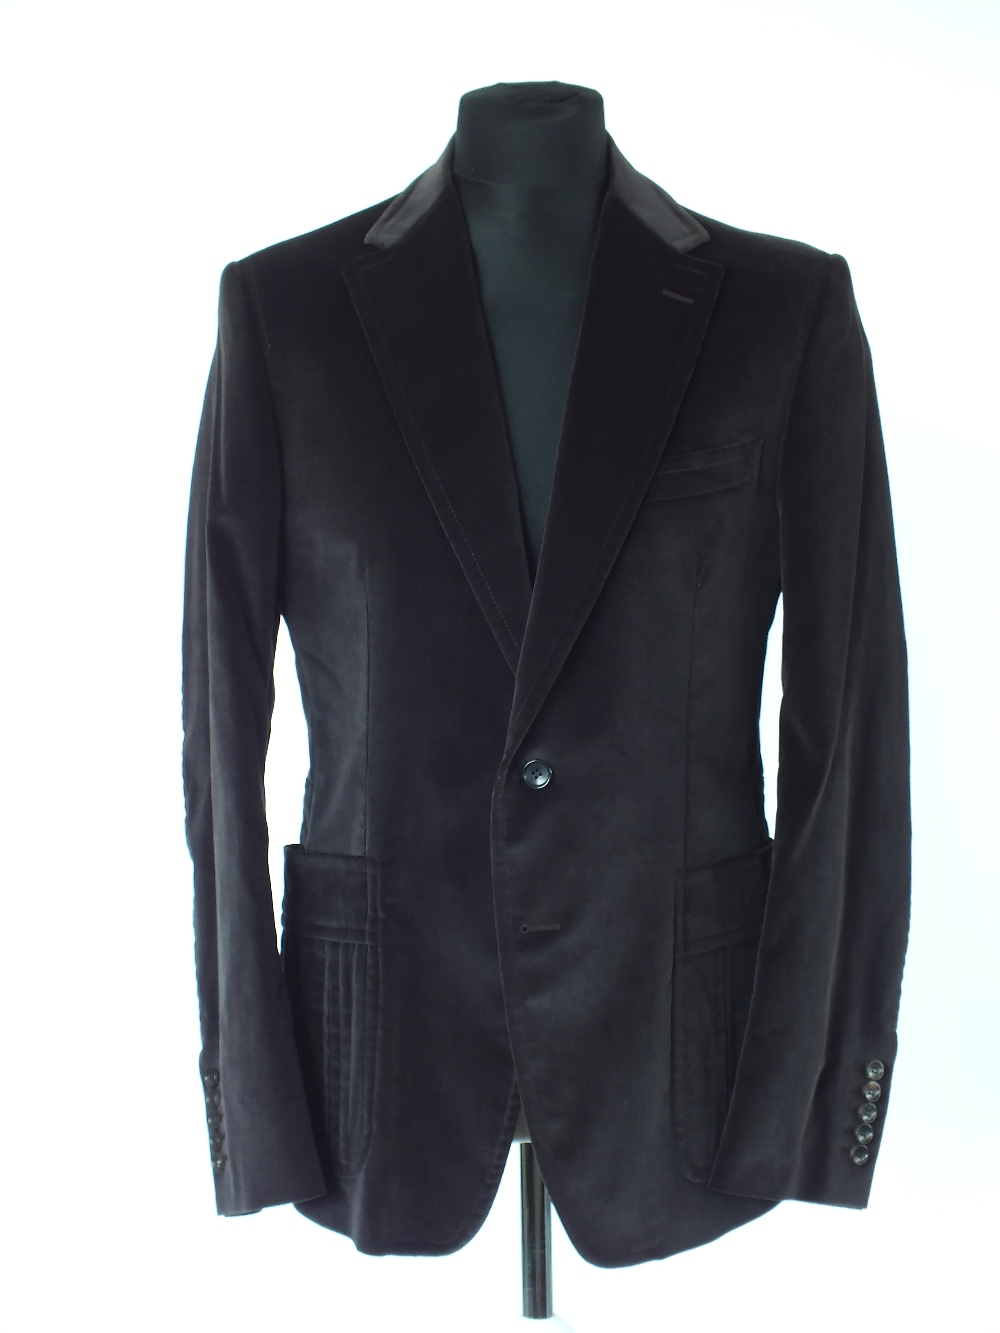 A Gucci jacket, grey, patch pockets with inverted pleat detail, belt waist detail to the back, lined